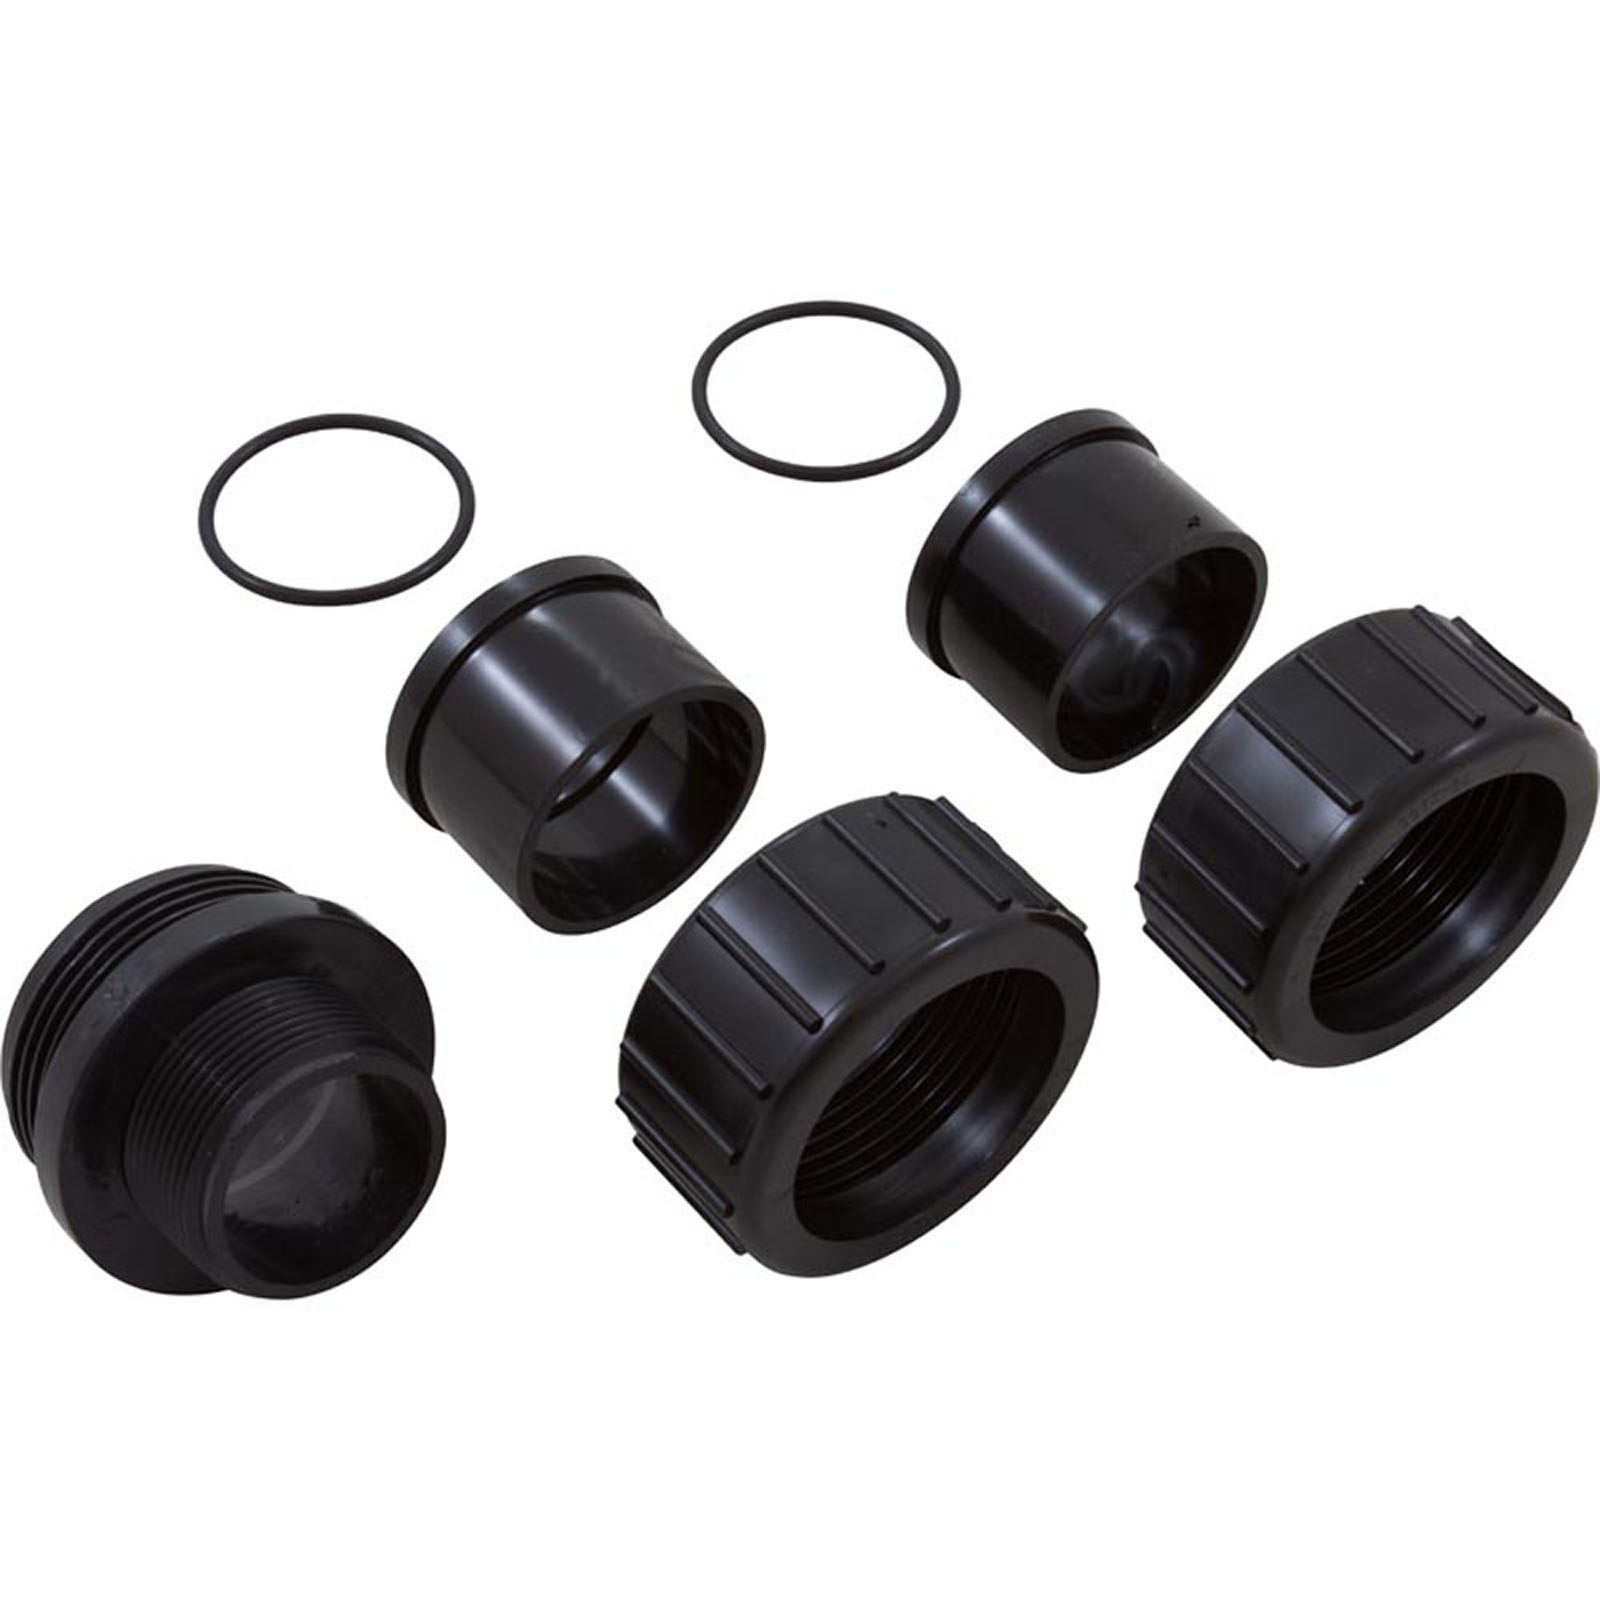 PENTAIR POOL PRODUCTS Quik Conn Kit 1.5"